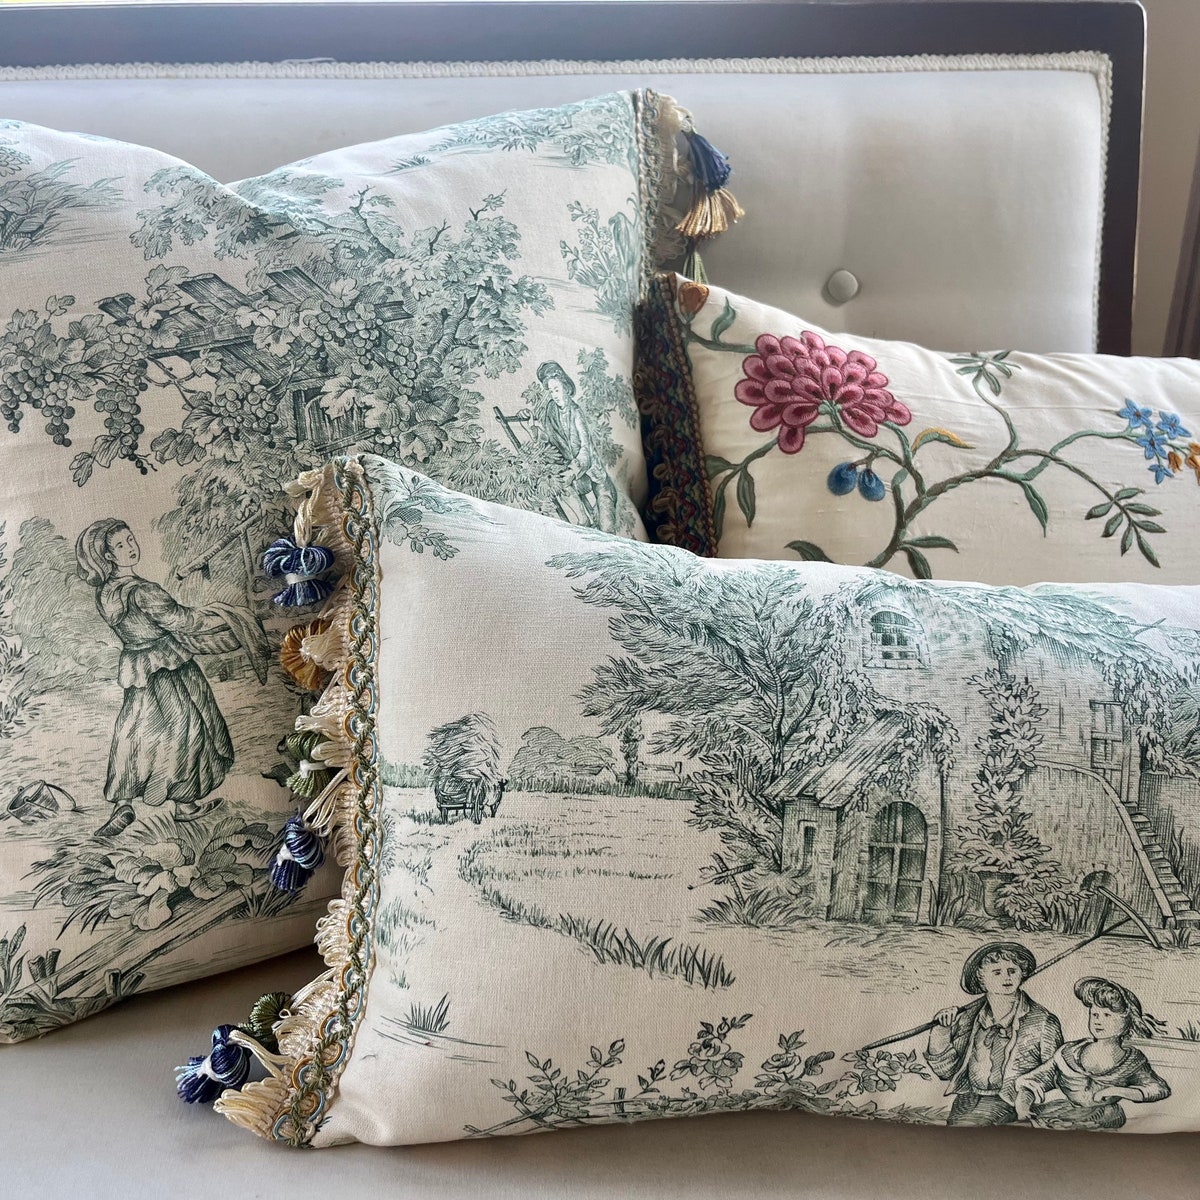 Green Toile Pillow Cover With Trim